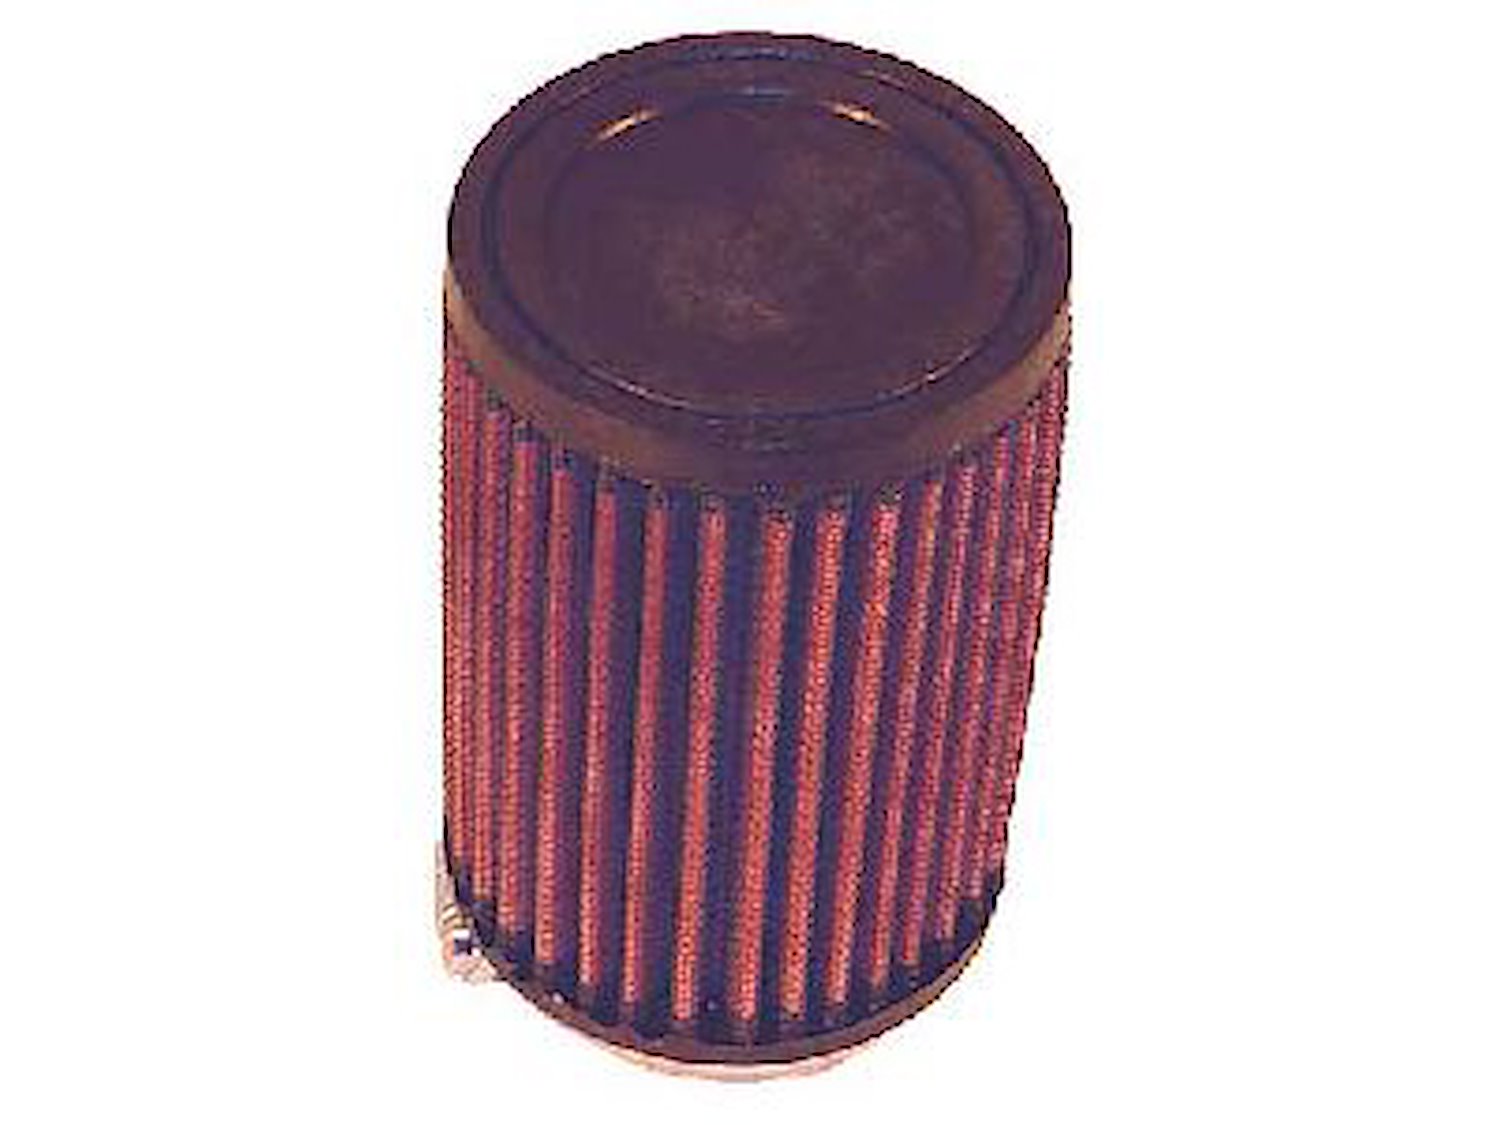 Round Straight Air Filter Flange Dia. (F): 2.25" (57 mm)